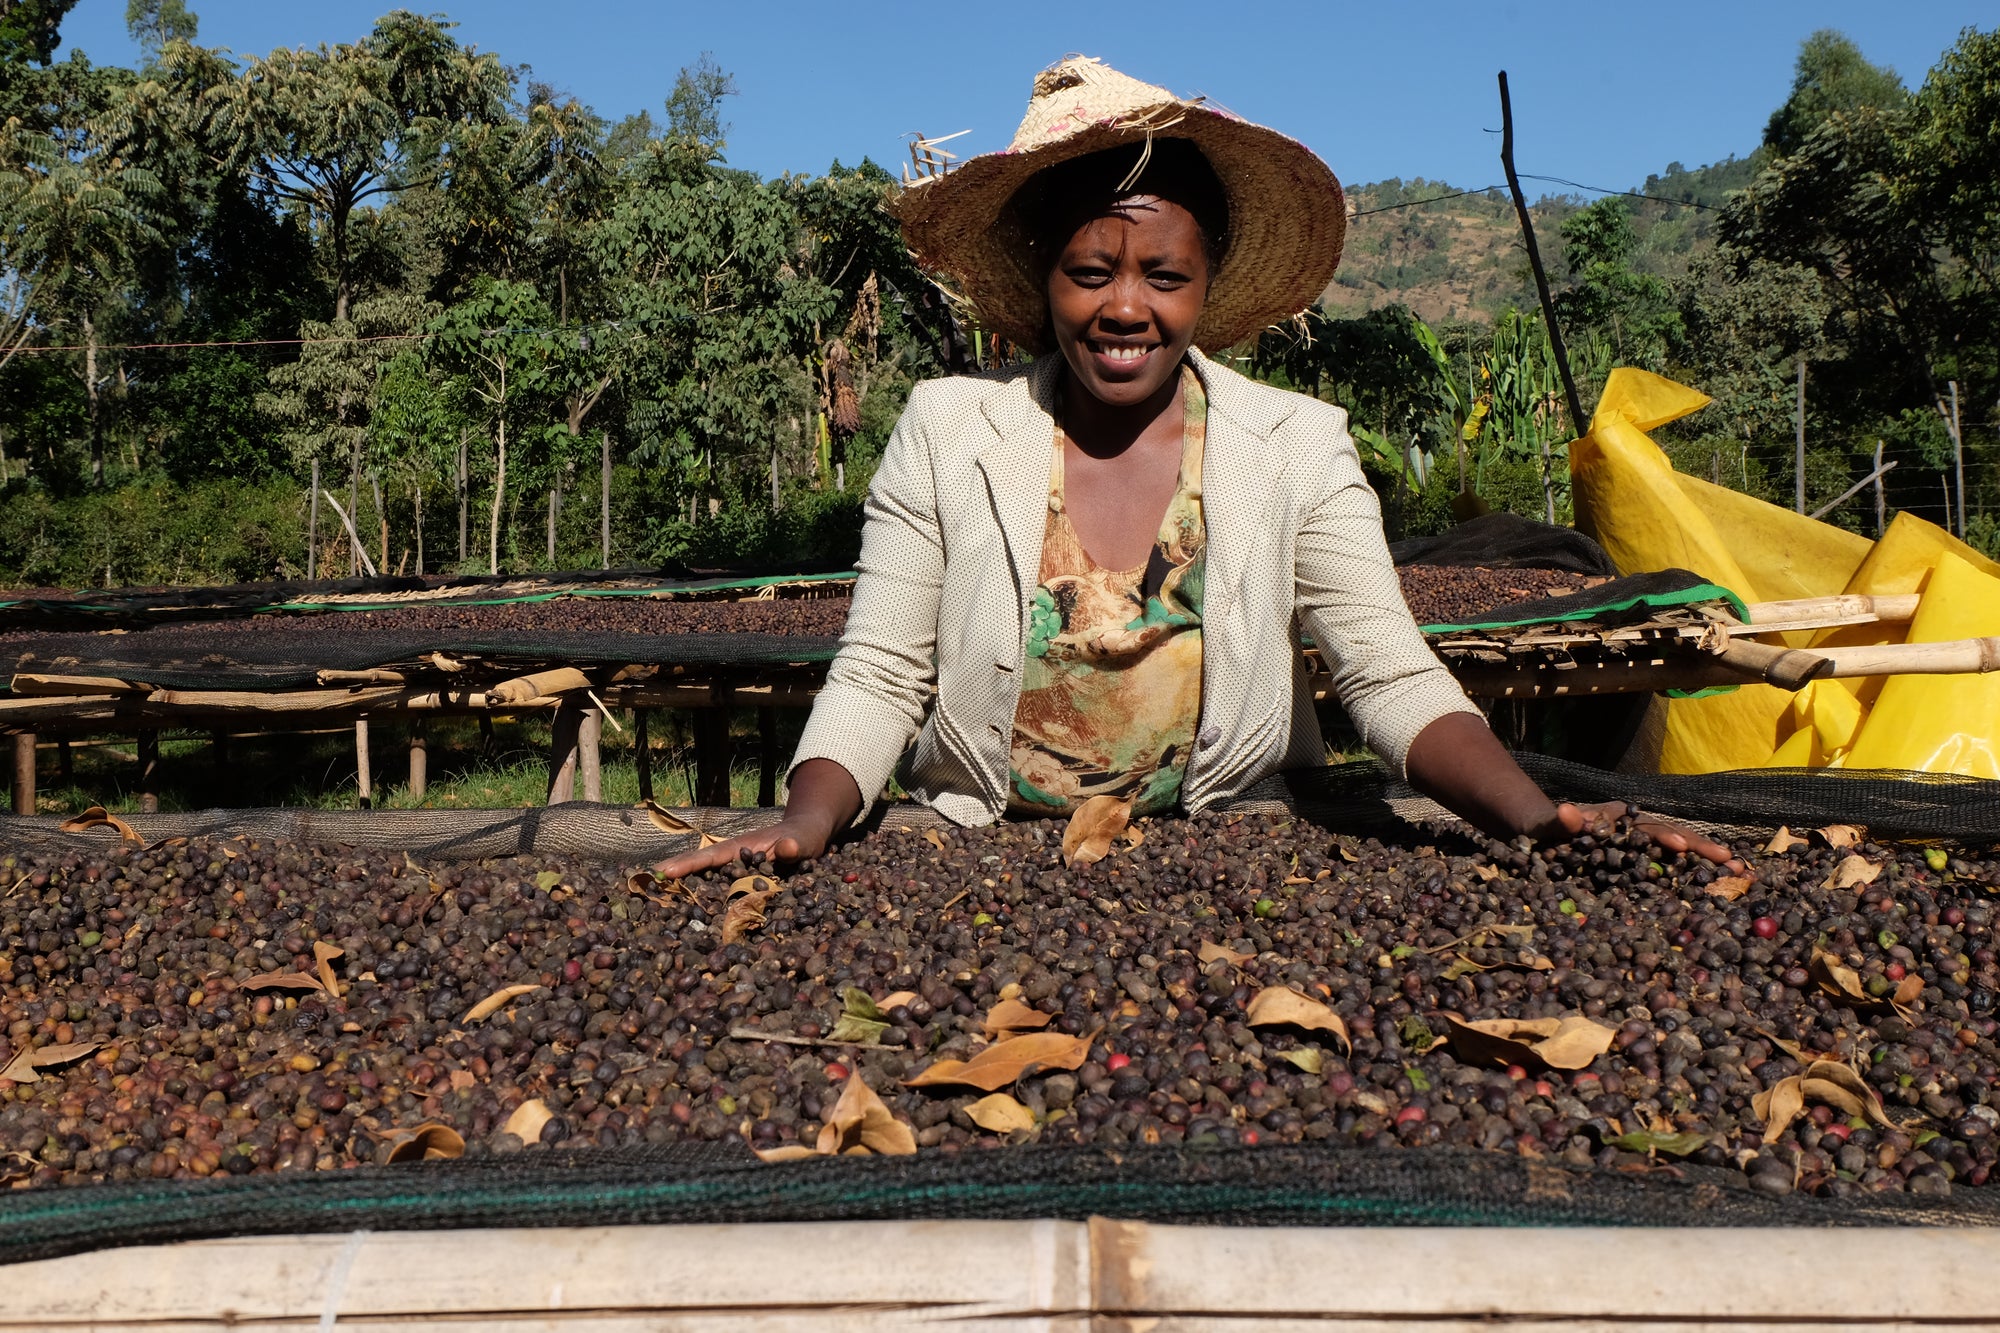 A worker at a coffee farm, smiling warmly at the camera over a tray of coffee berries.